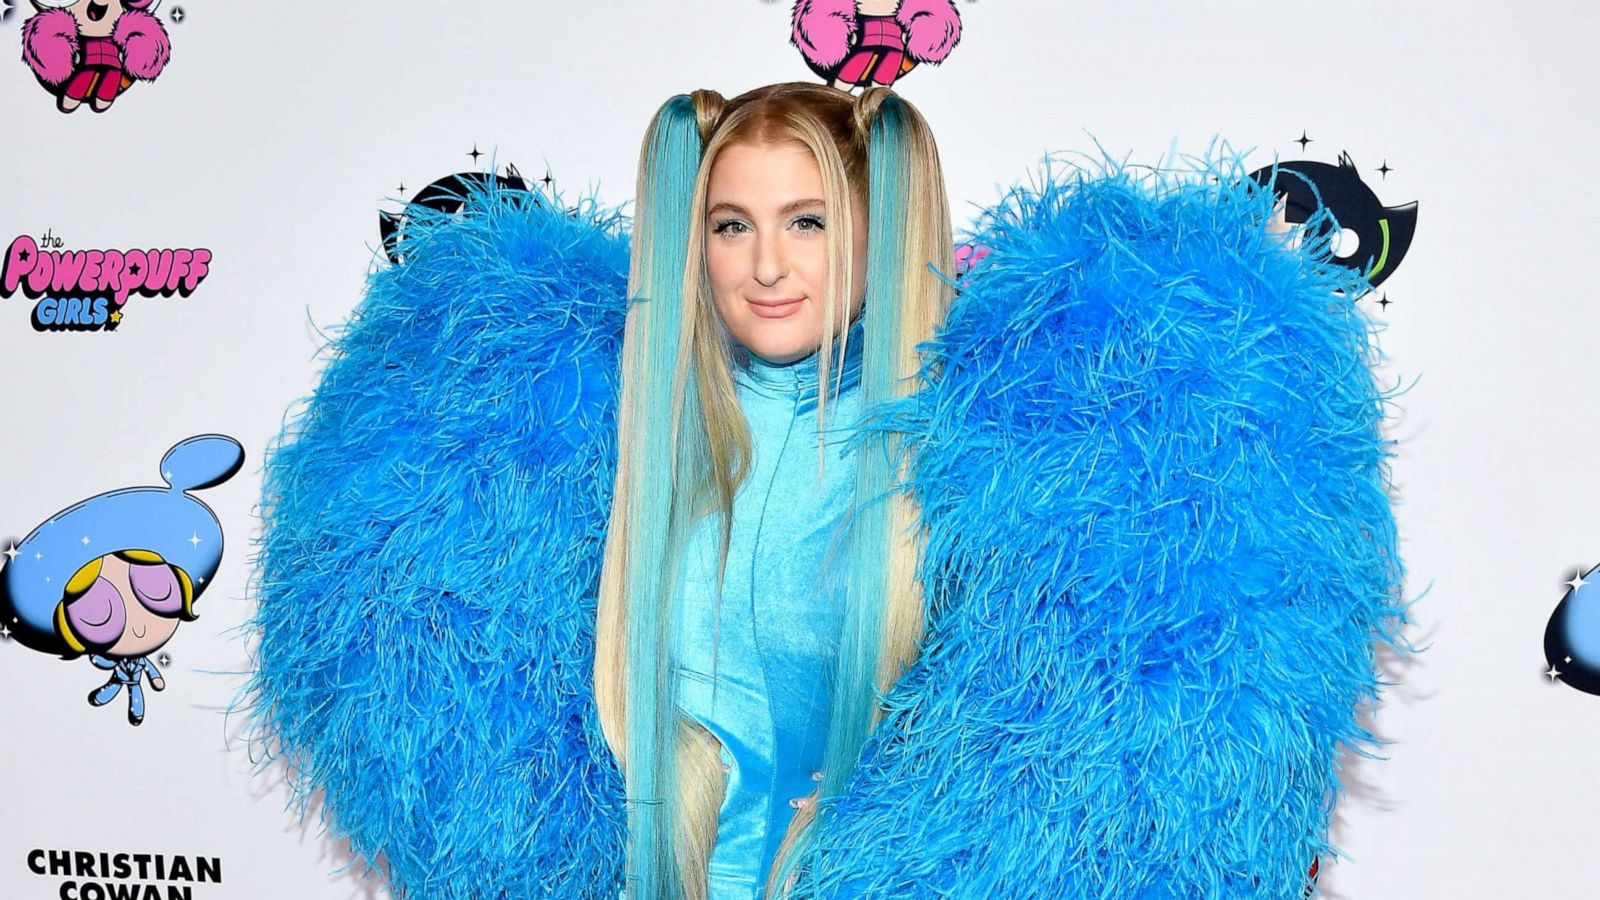 Meghan Trainor says her biggest parenting fail was 'boiling' her